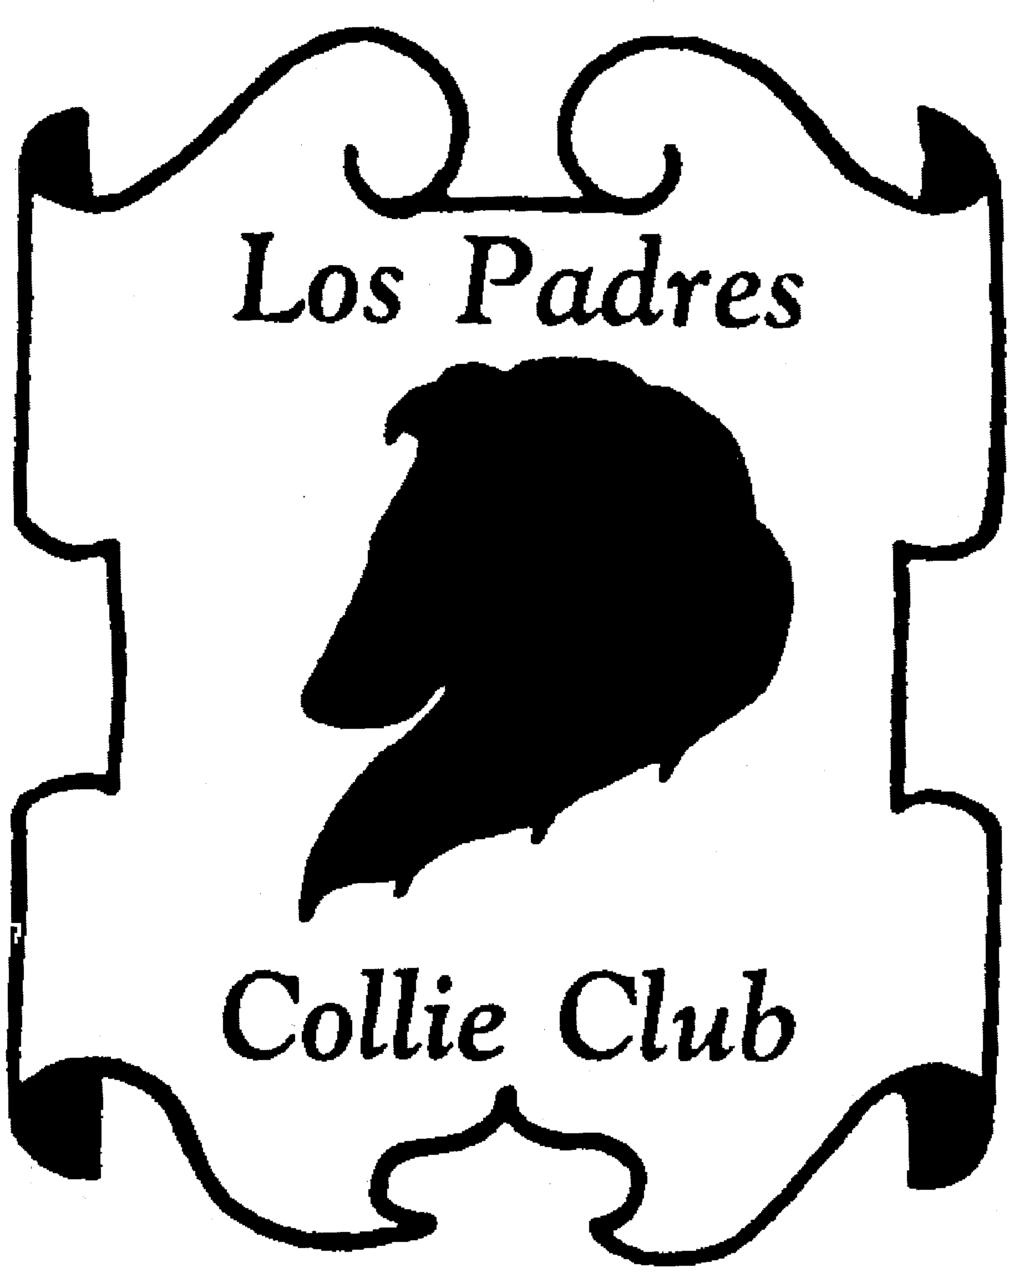 LOS PADRES COLLIE CLUB CHALLENGE TROPHIES LPCC show only Event #2018109801 PM Show 100 Dog Limit per Show January 19, 2017 Show Hours 7:30 am to 6pm The afternoon event will begin no sooner than 1